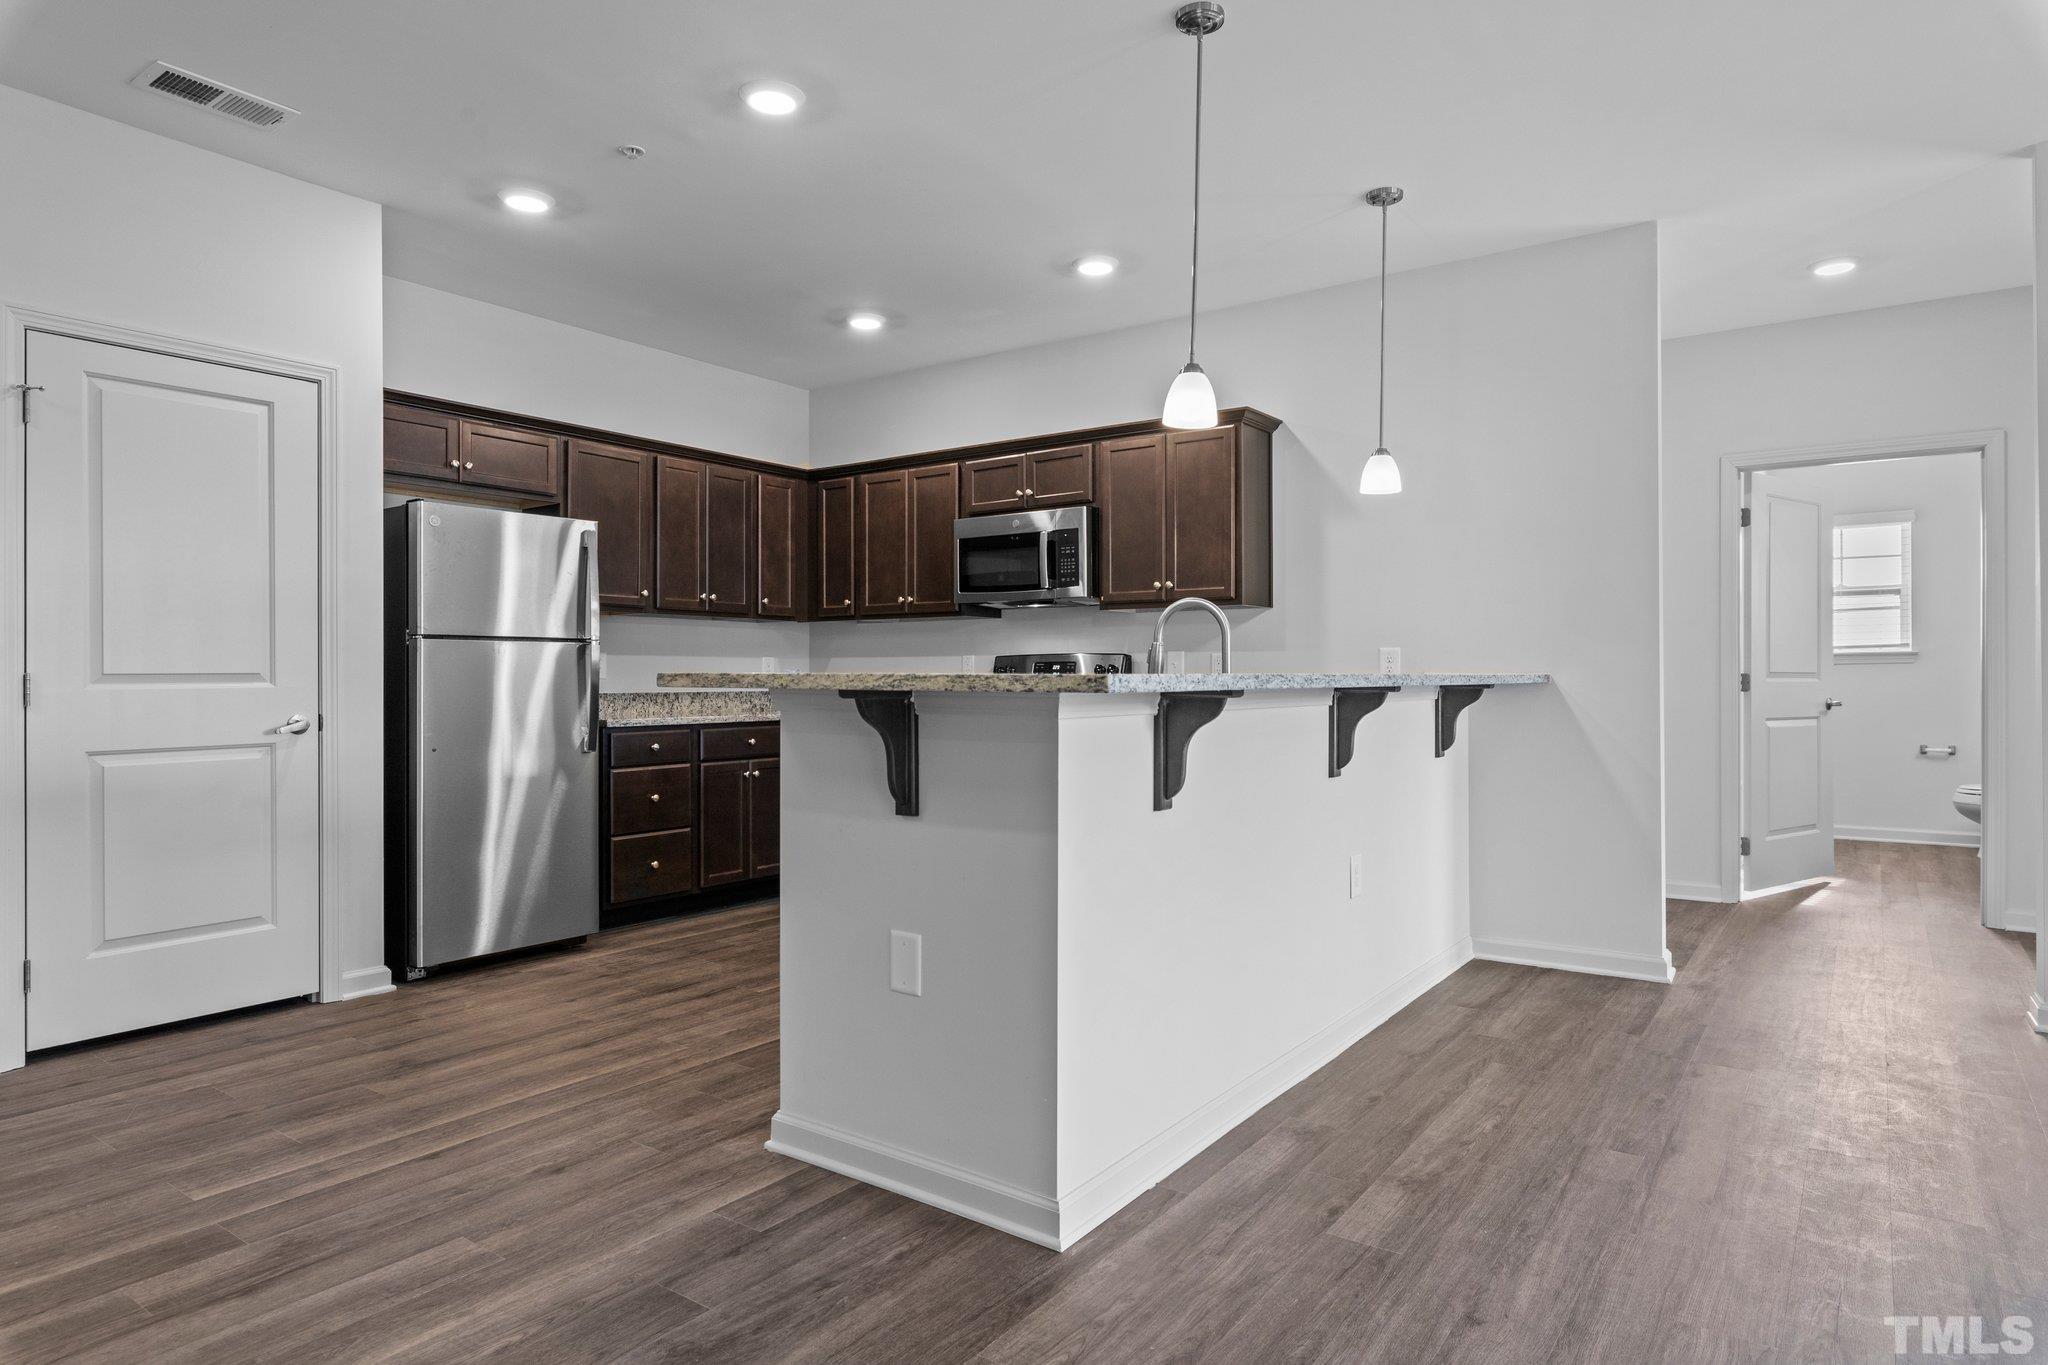 a kitchen with kitchen island a sink stainless steel appliances and wooden floor